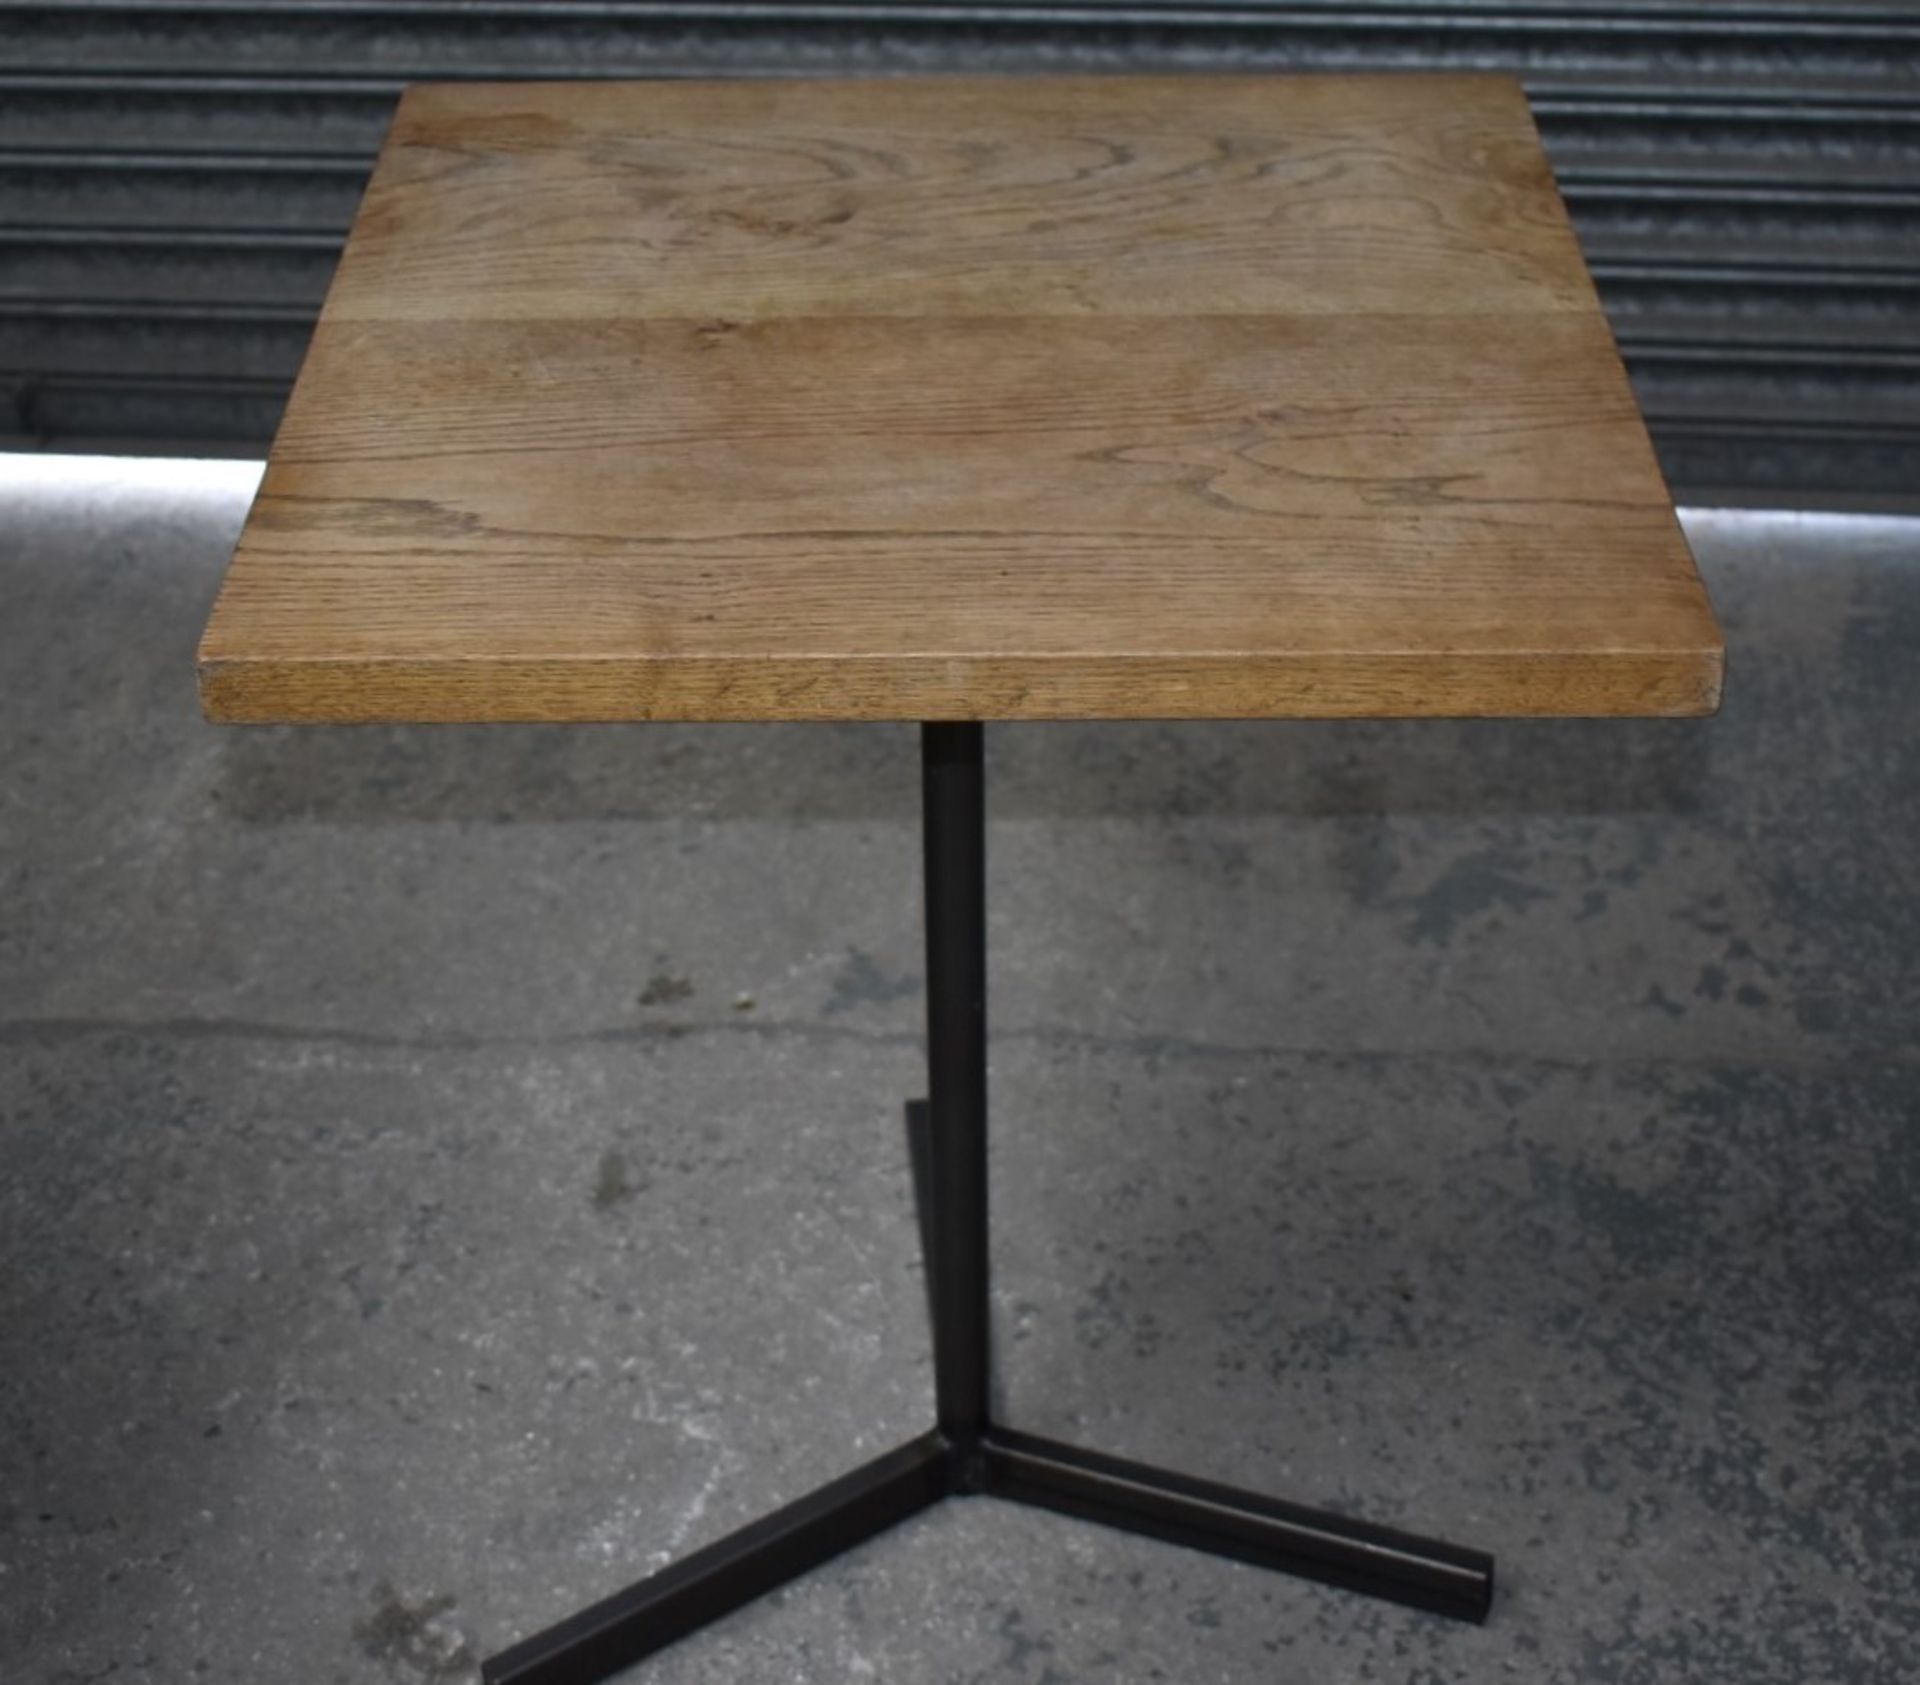 8 x Restaurant Dining Tables With Industrial Style Bases and Solid Wood Tops - Dimensions: 60x60cm - - Image 13 of 13